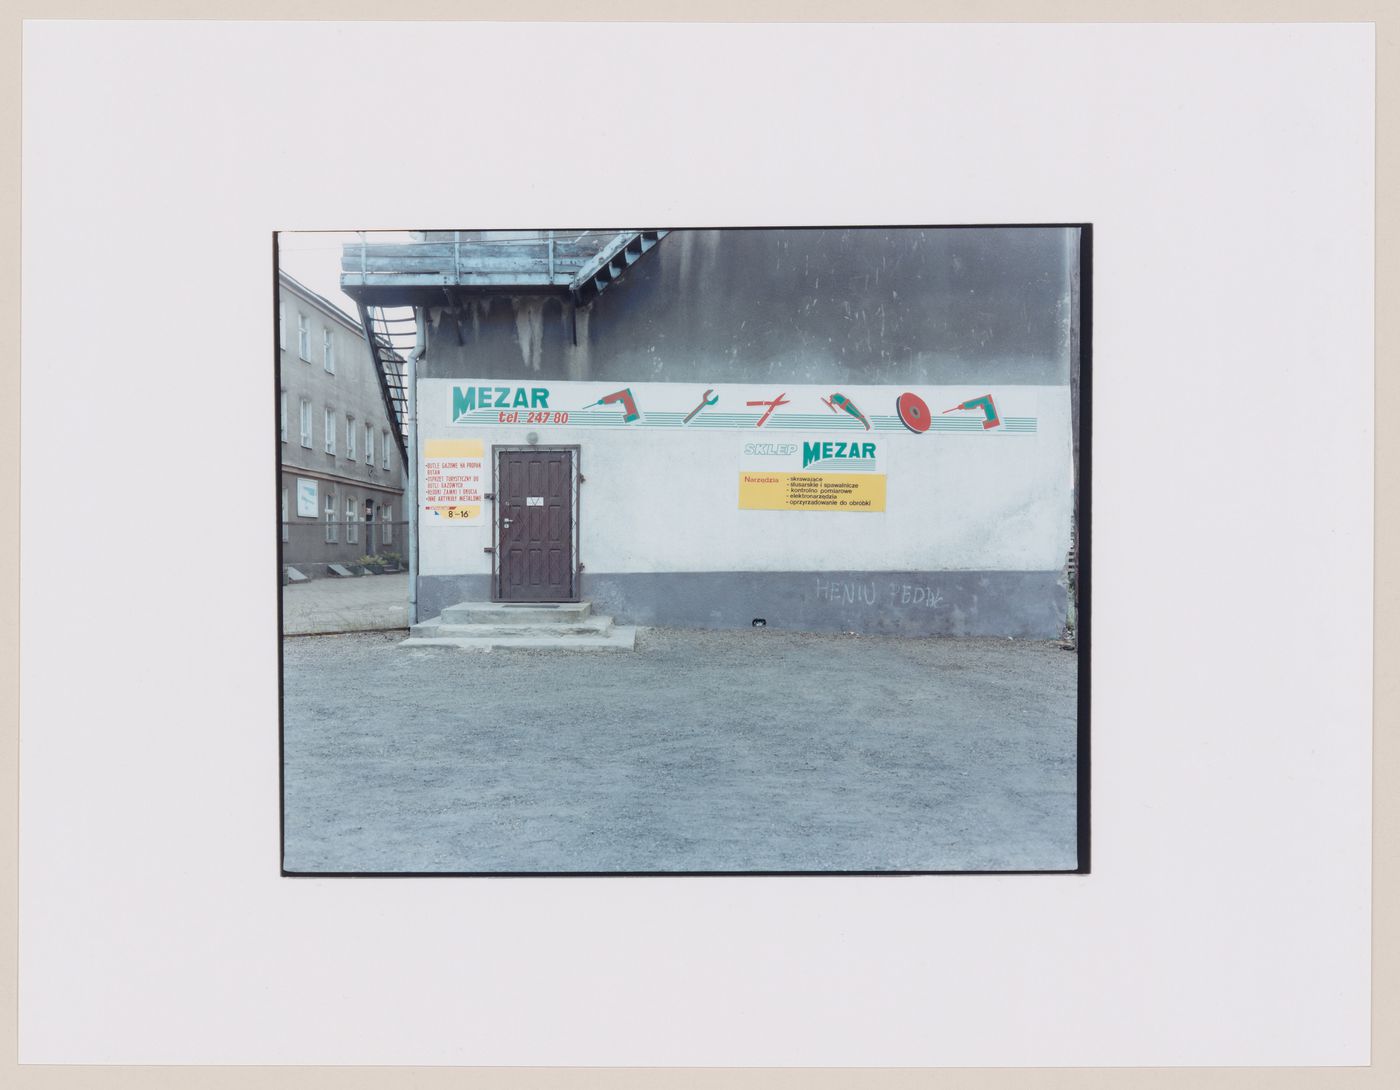 View of the entrance to a tool store showing a sign painted on the side of a building and a fire escape, Gorzów Wielkopolski, Poland (from the series "In between cities")